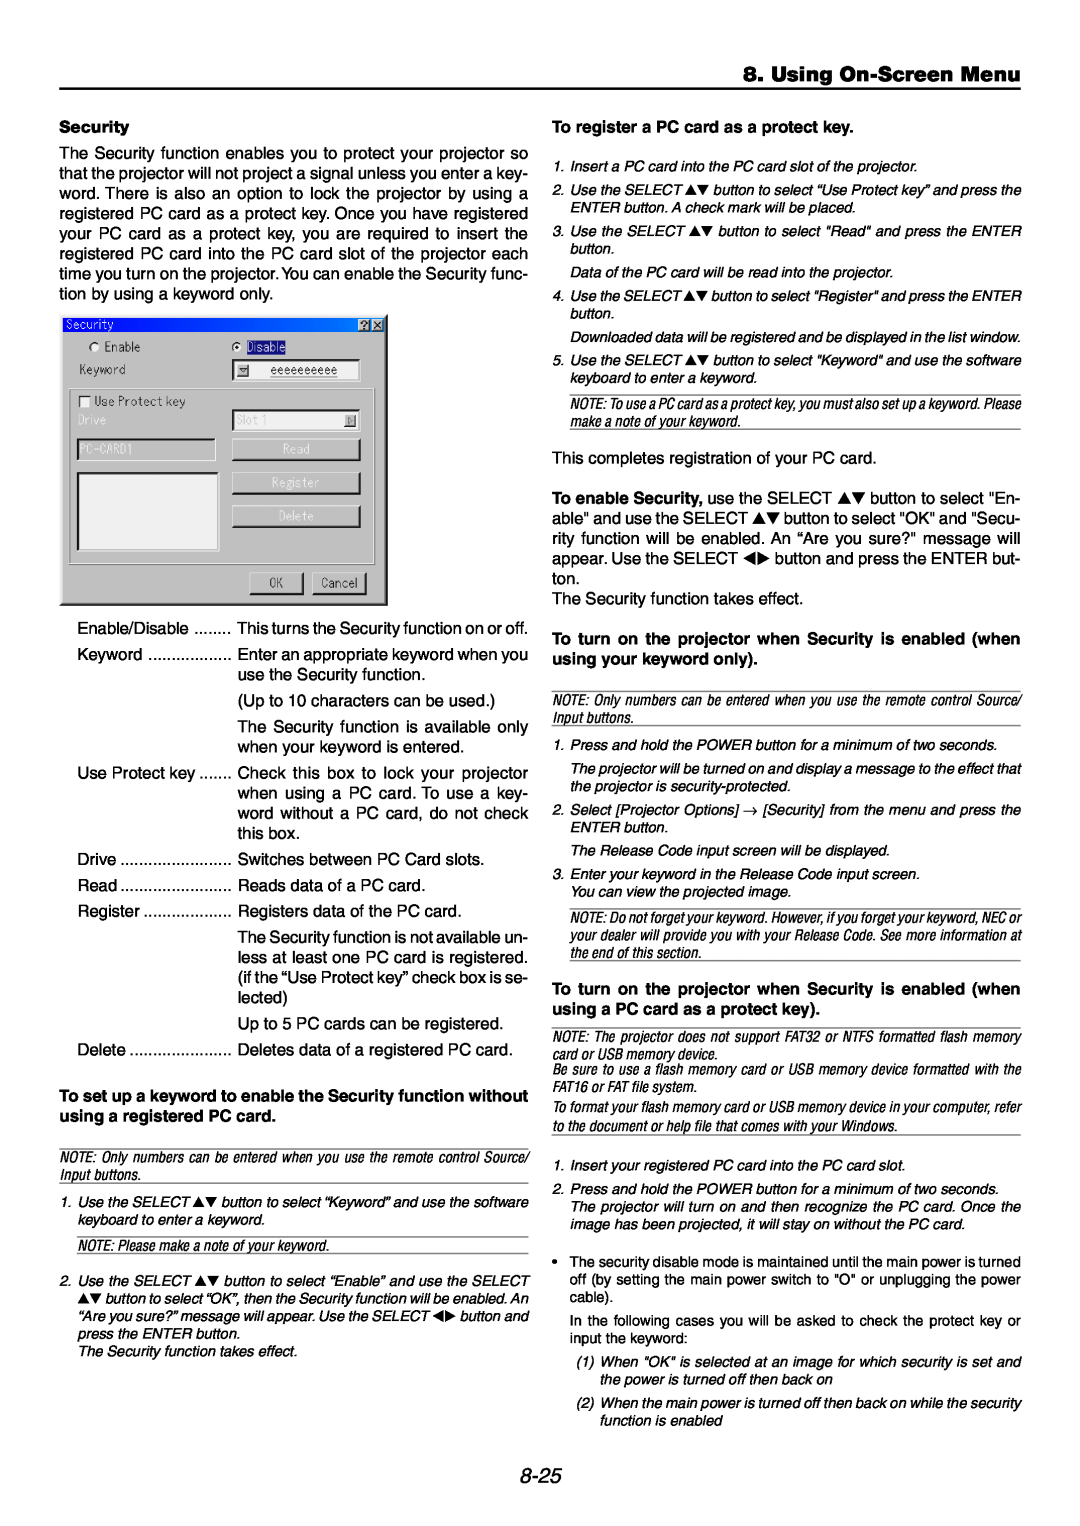 NEC GT6000 user manual Using On-ScreenMenu, 8-25, Security, To register a PC card as a protect key 